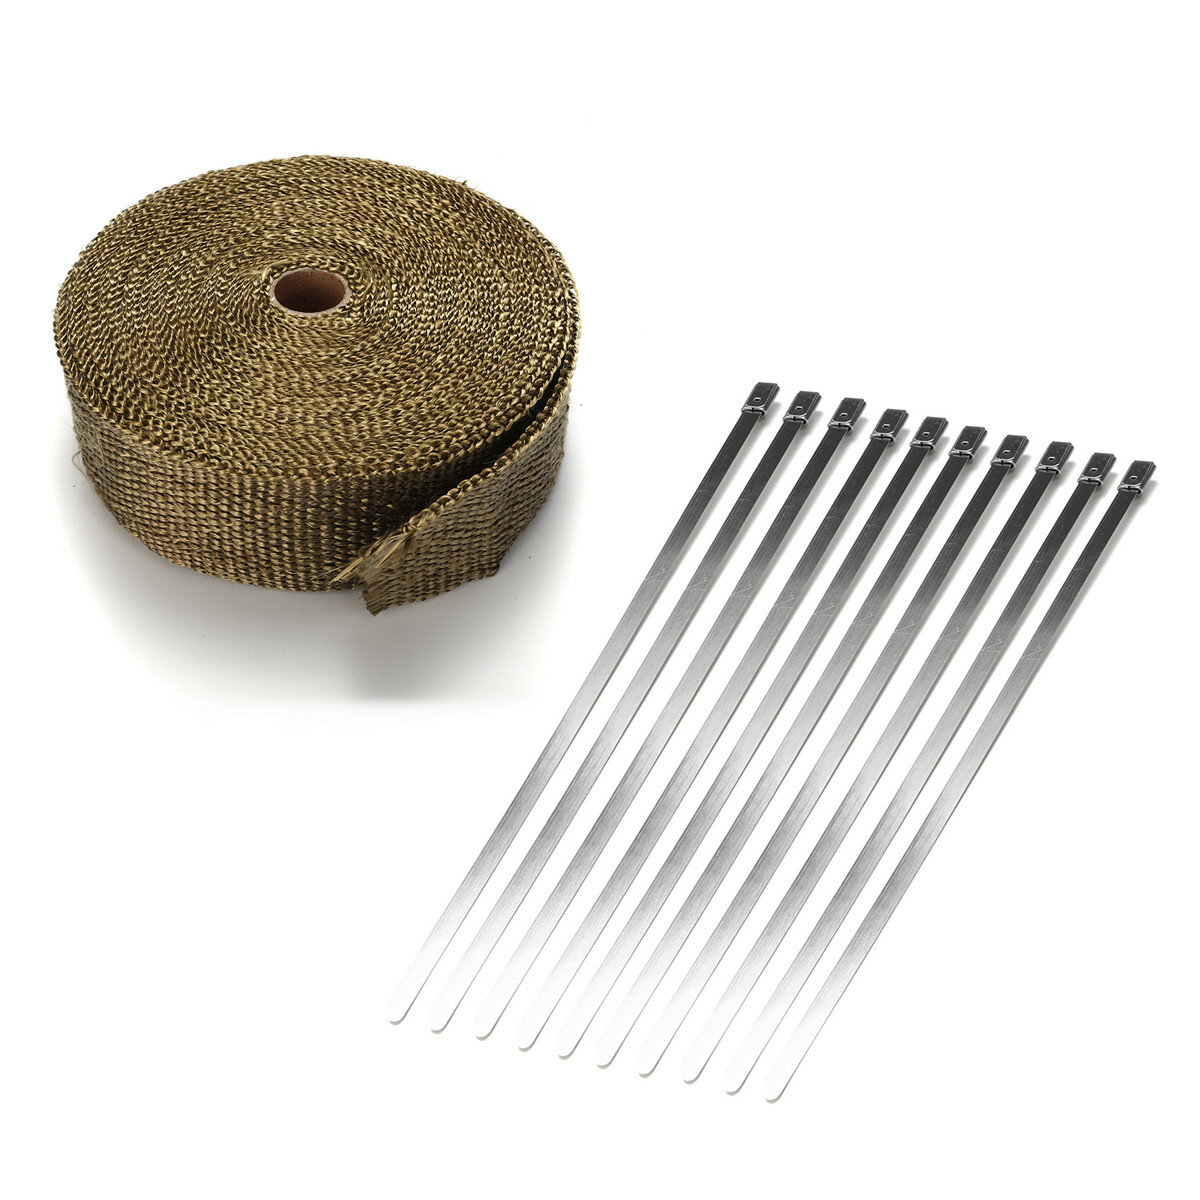 5m /10m /15m exhaust header heat pipe wrap tape w/ 10 stainless steel